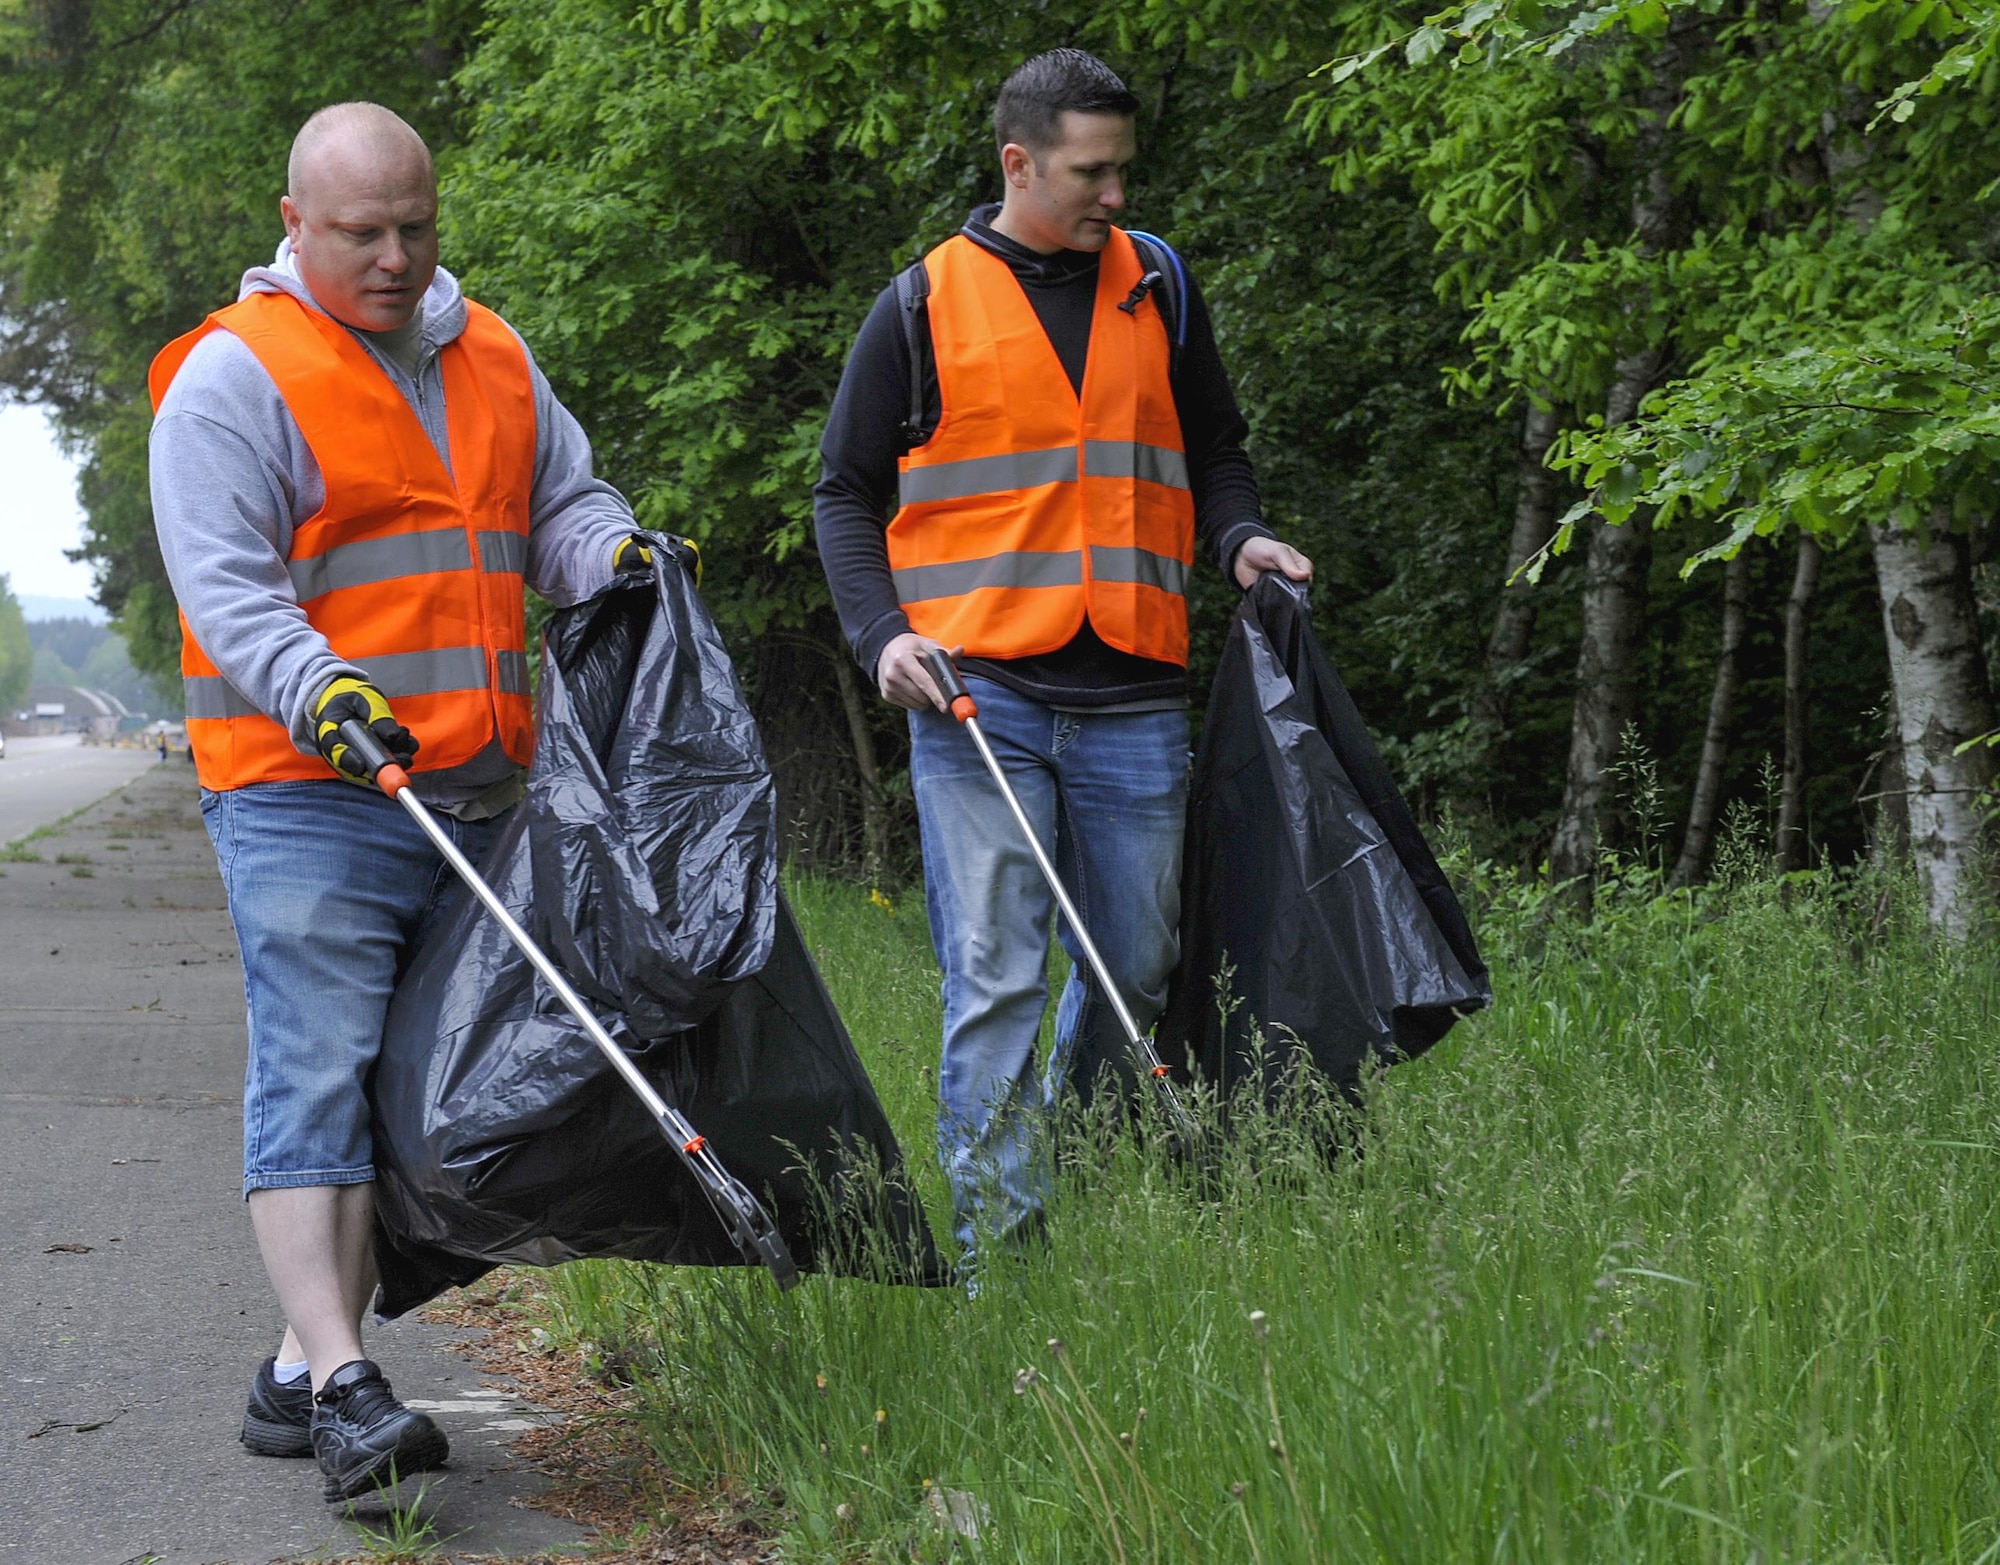 Volunteers pick up trash during an off-base clean-up event May 20, 2016, at Ramstein Air Base, Germany. These efforts are one of many ways Team Ramstein assists in ensuring Ramstein and its surrounding areas stay in top shape. (U.S. Air Force photo/Senior Airman Larissa Greatwood)